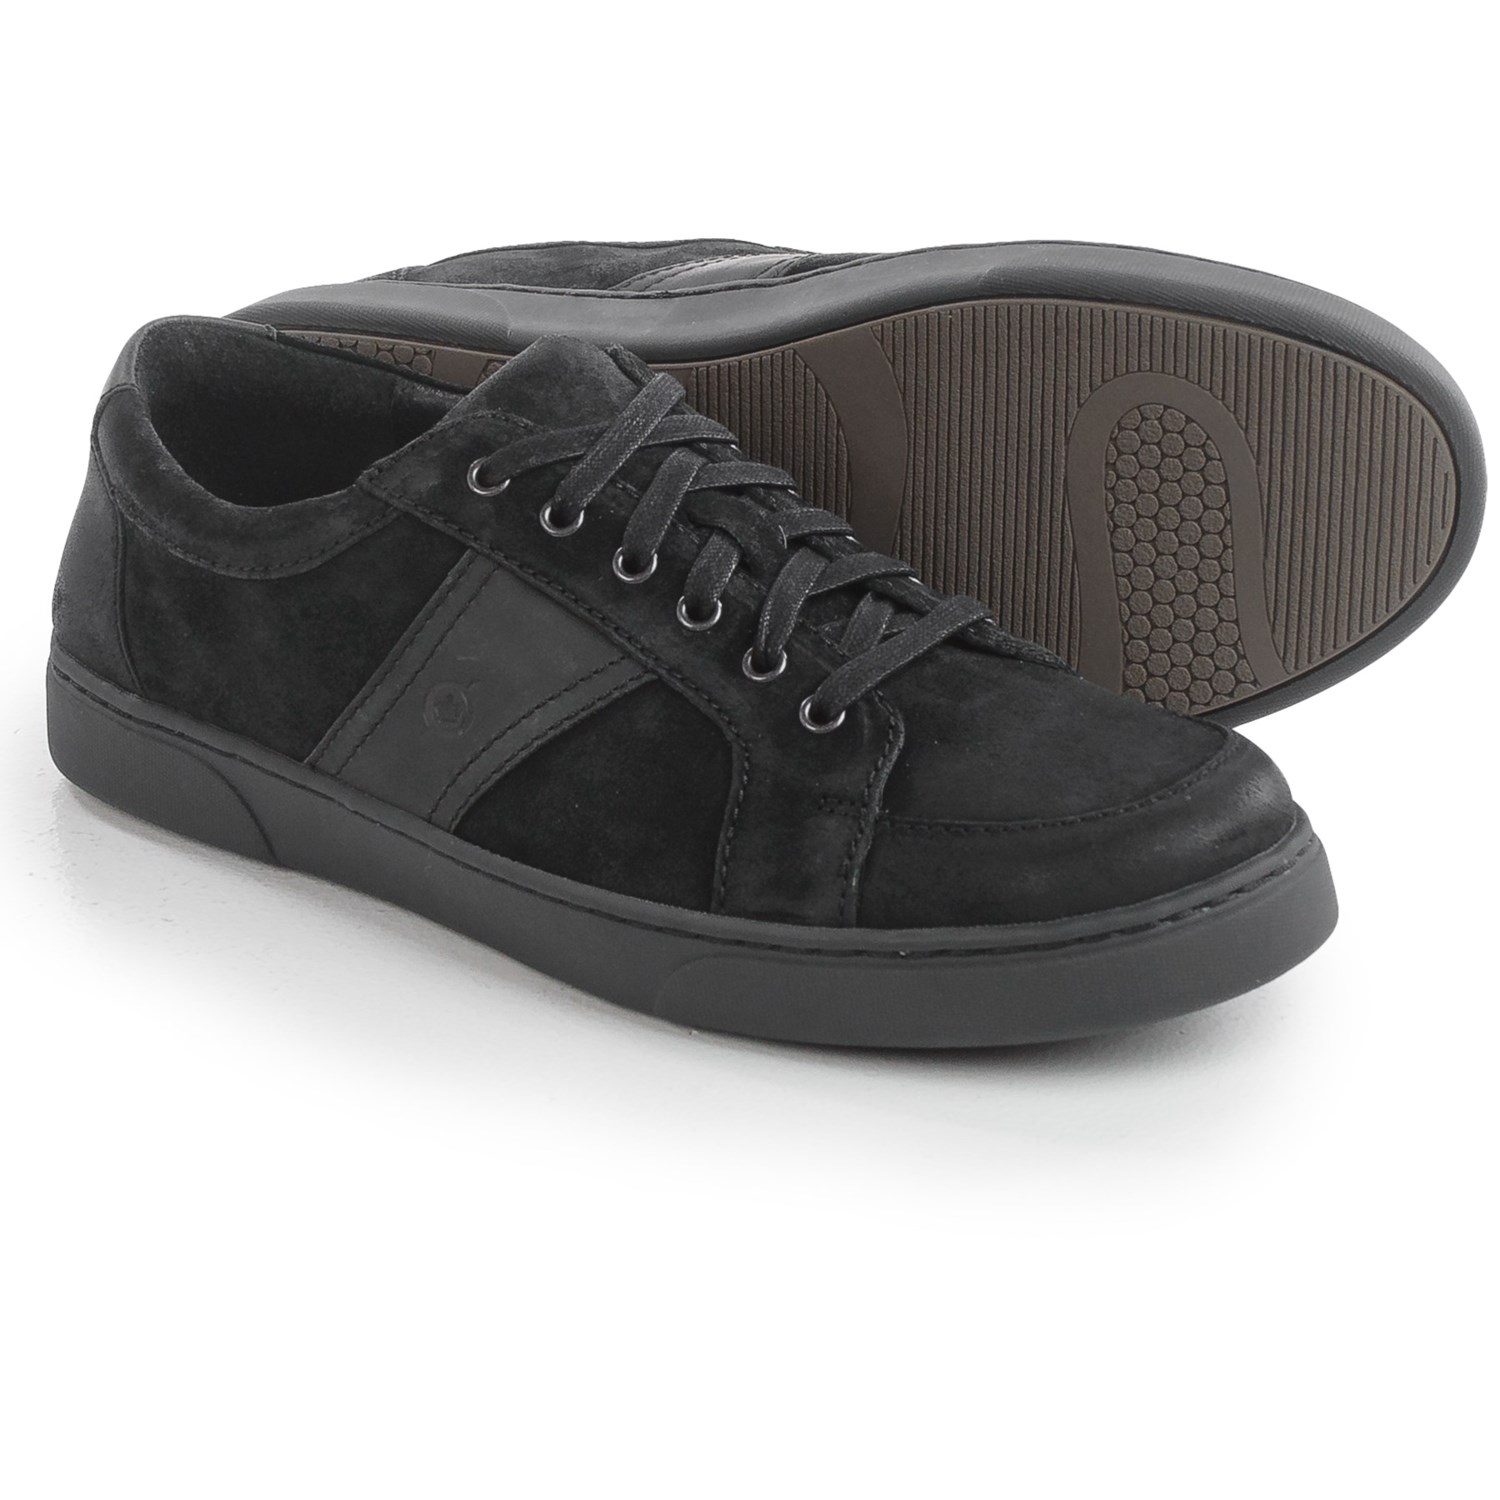 Born Baum Sneakers – Leather (For Men)